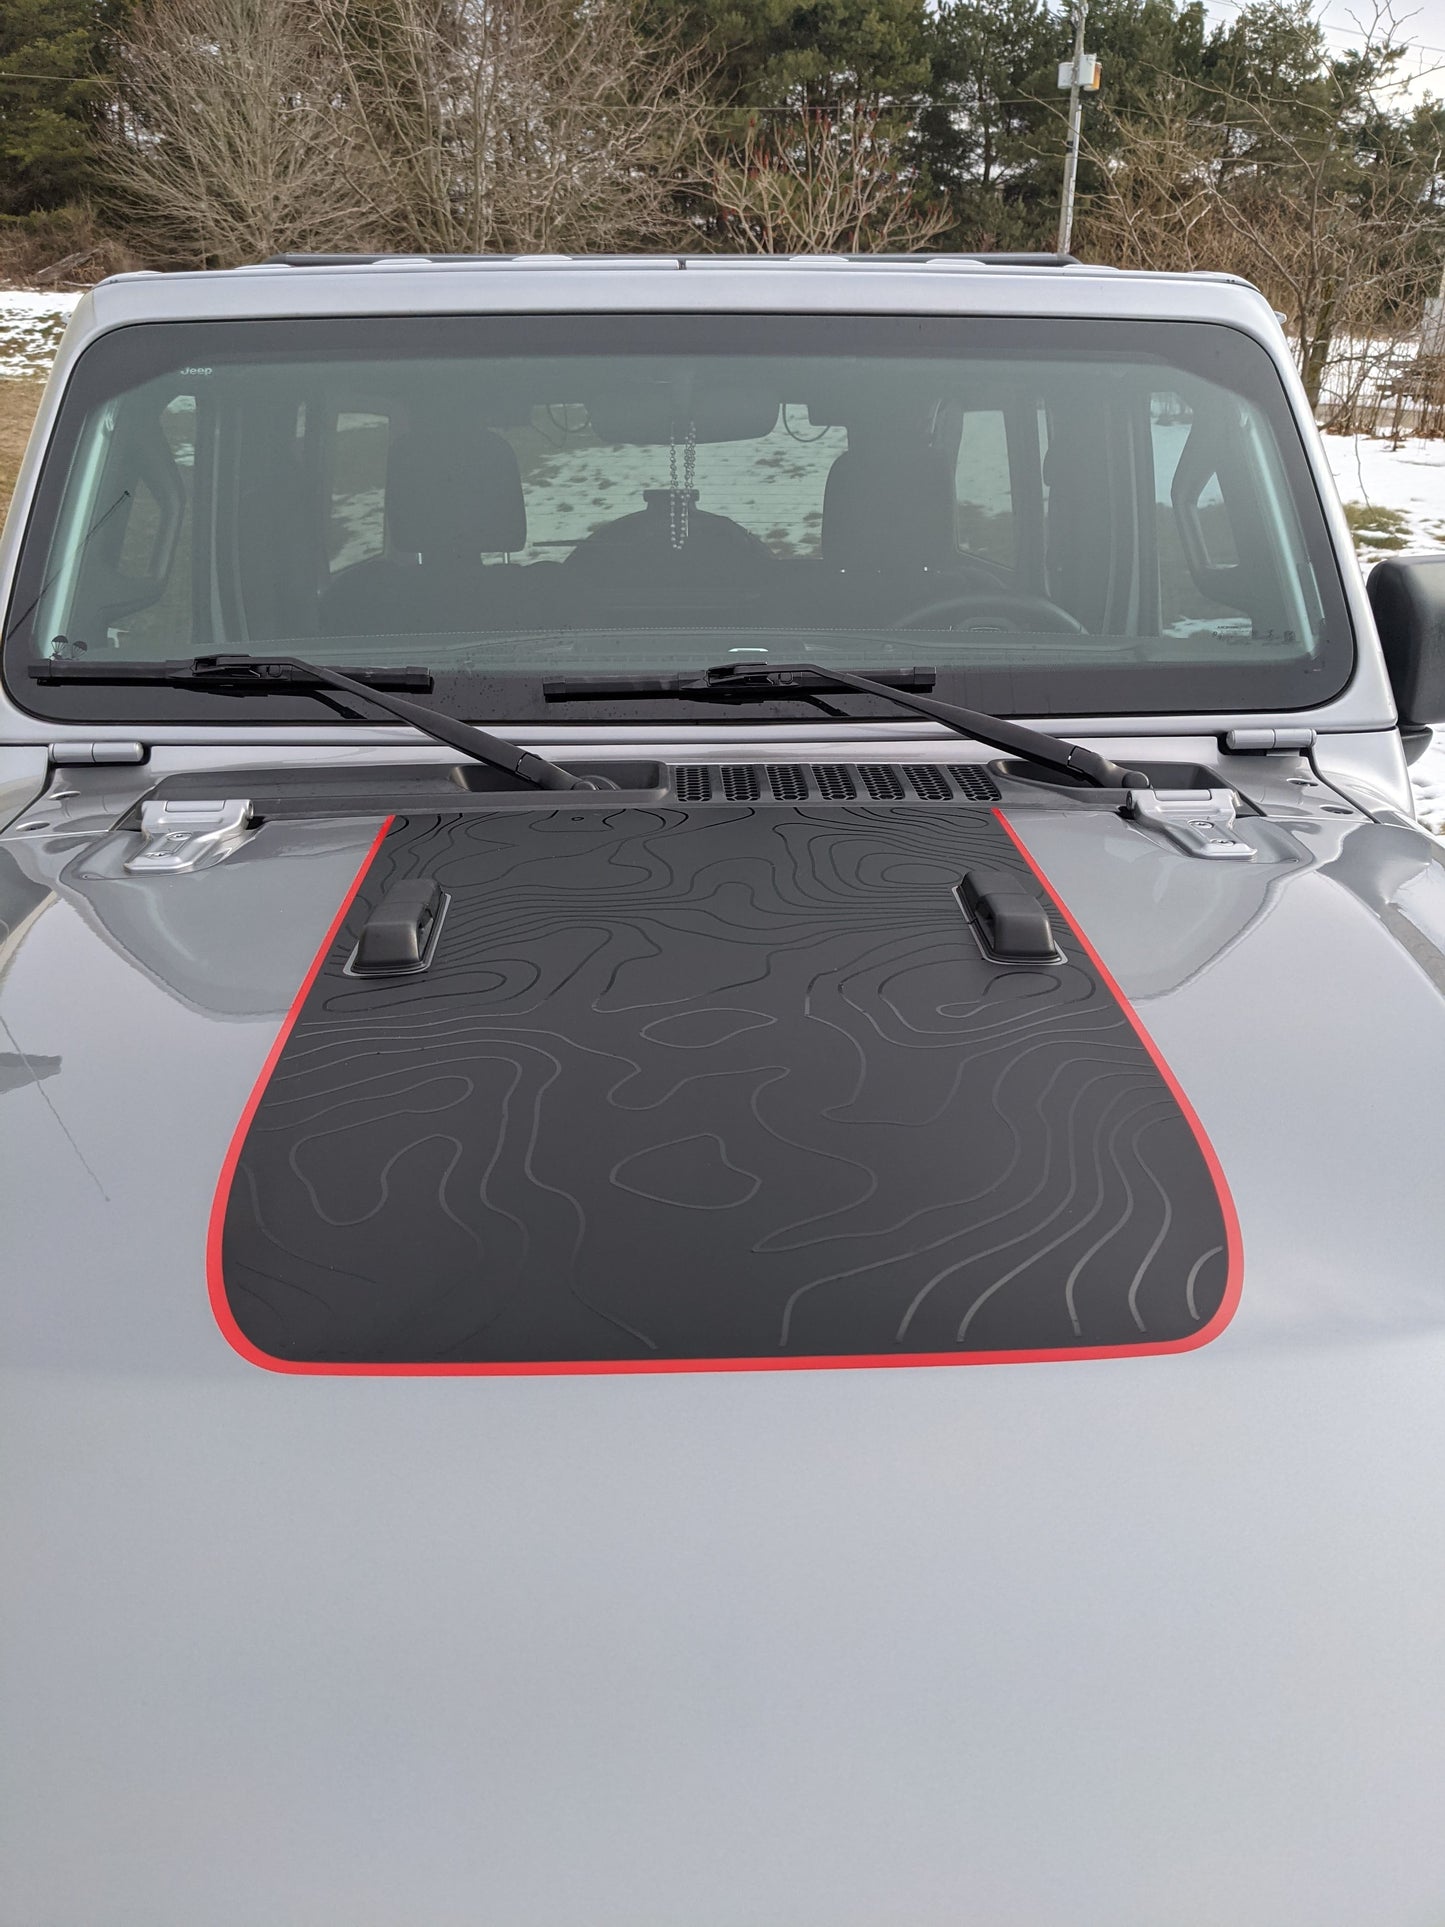 Topographical Accent Line Blackout Hood Decal- Fits Wrangler & Gladiator JL Hood Decal (3 Pieces)